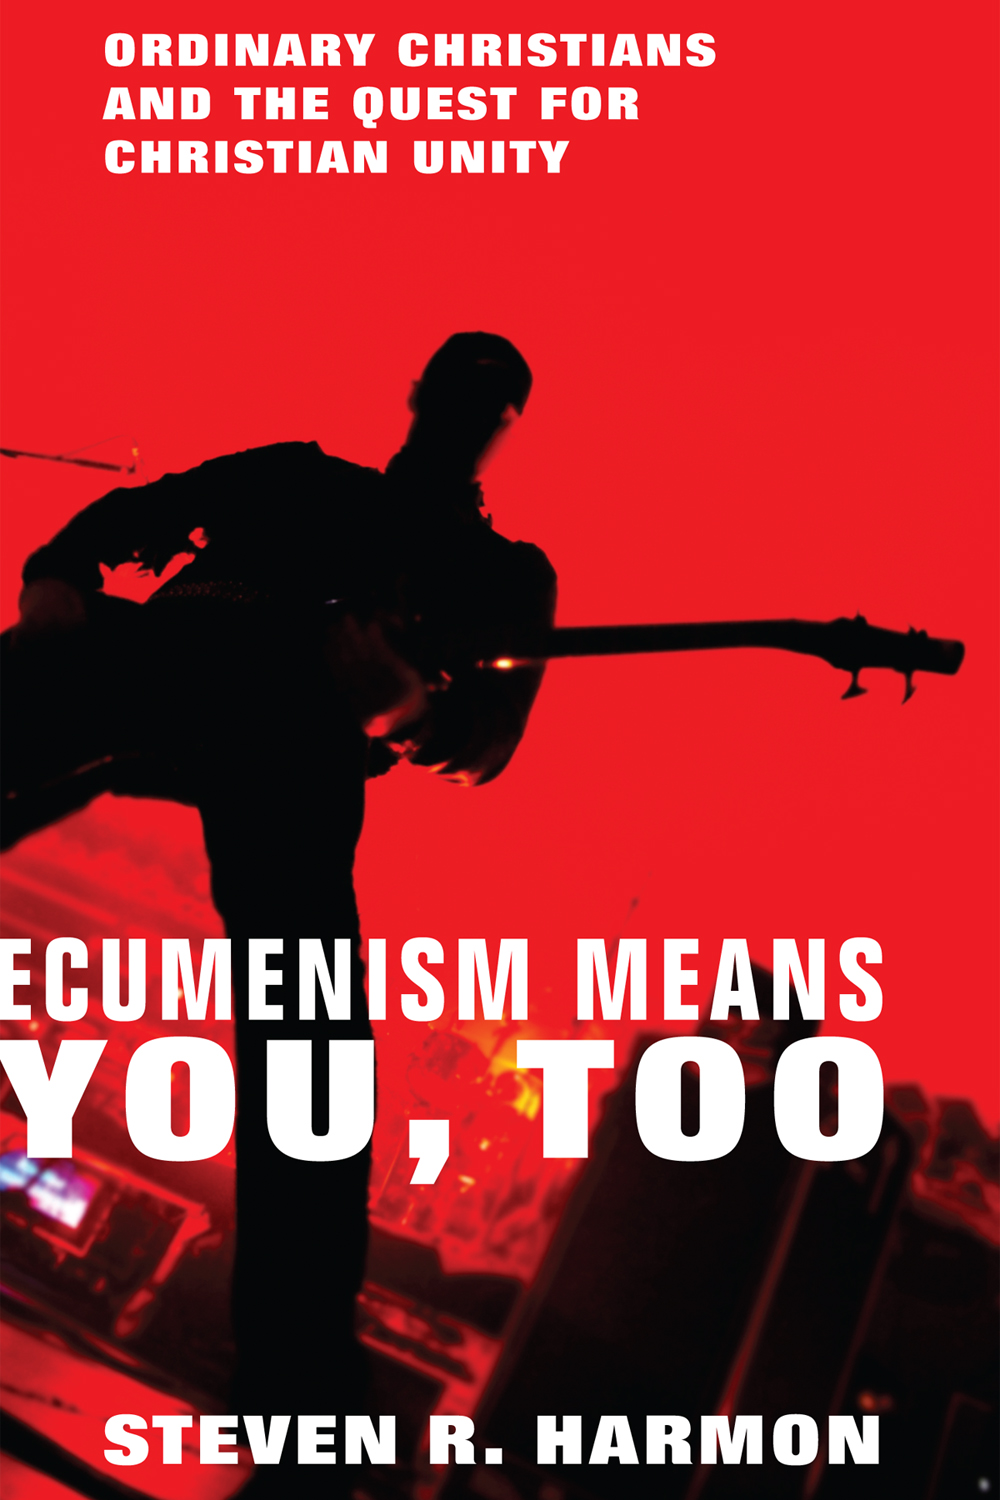 [Ecumenism+Means+You,+Too+cover.jpg]